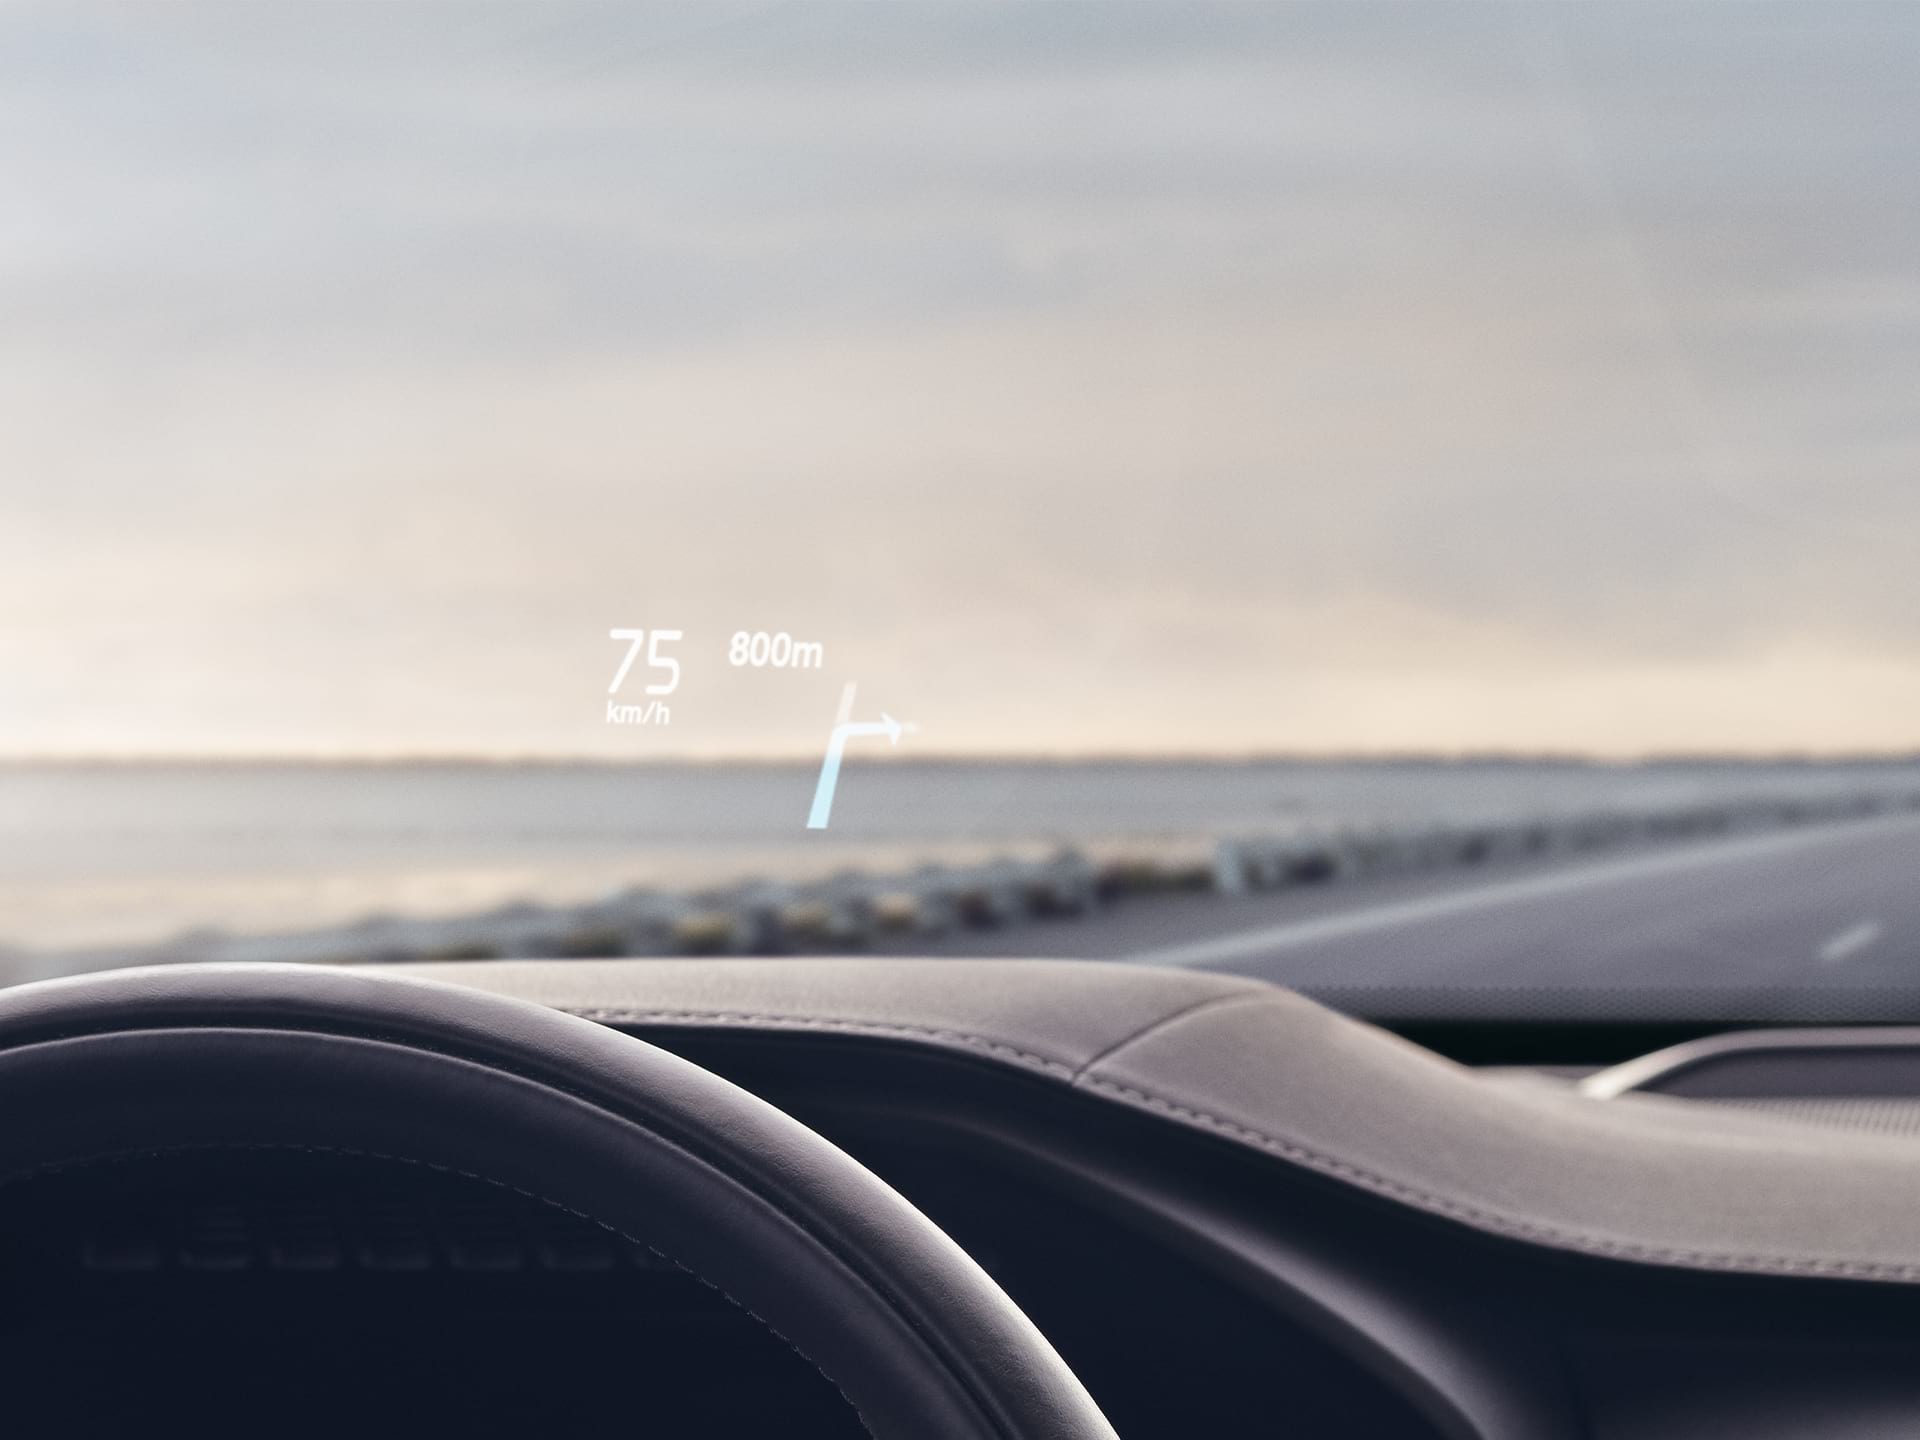 Inside a Volvo, head-up display showing driving speed and navigation on the windshield.